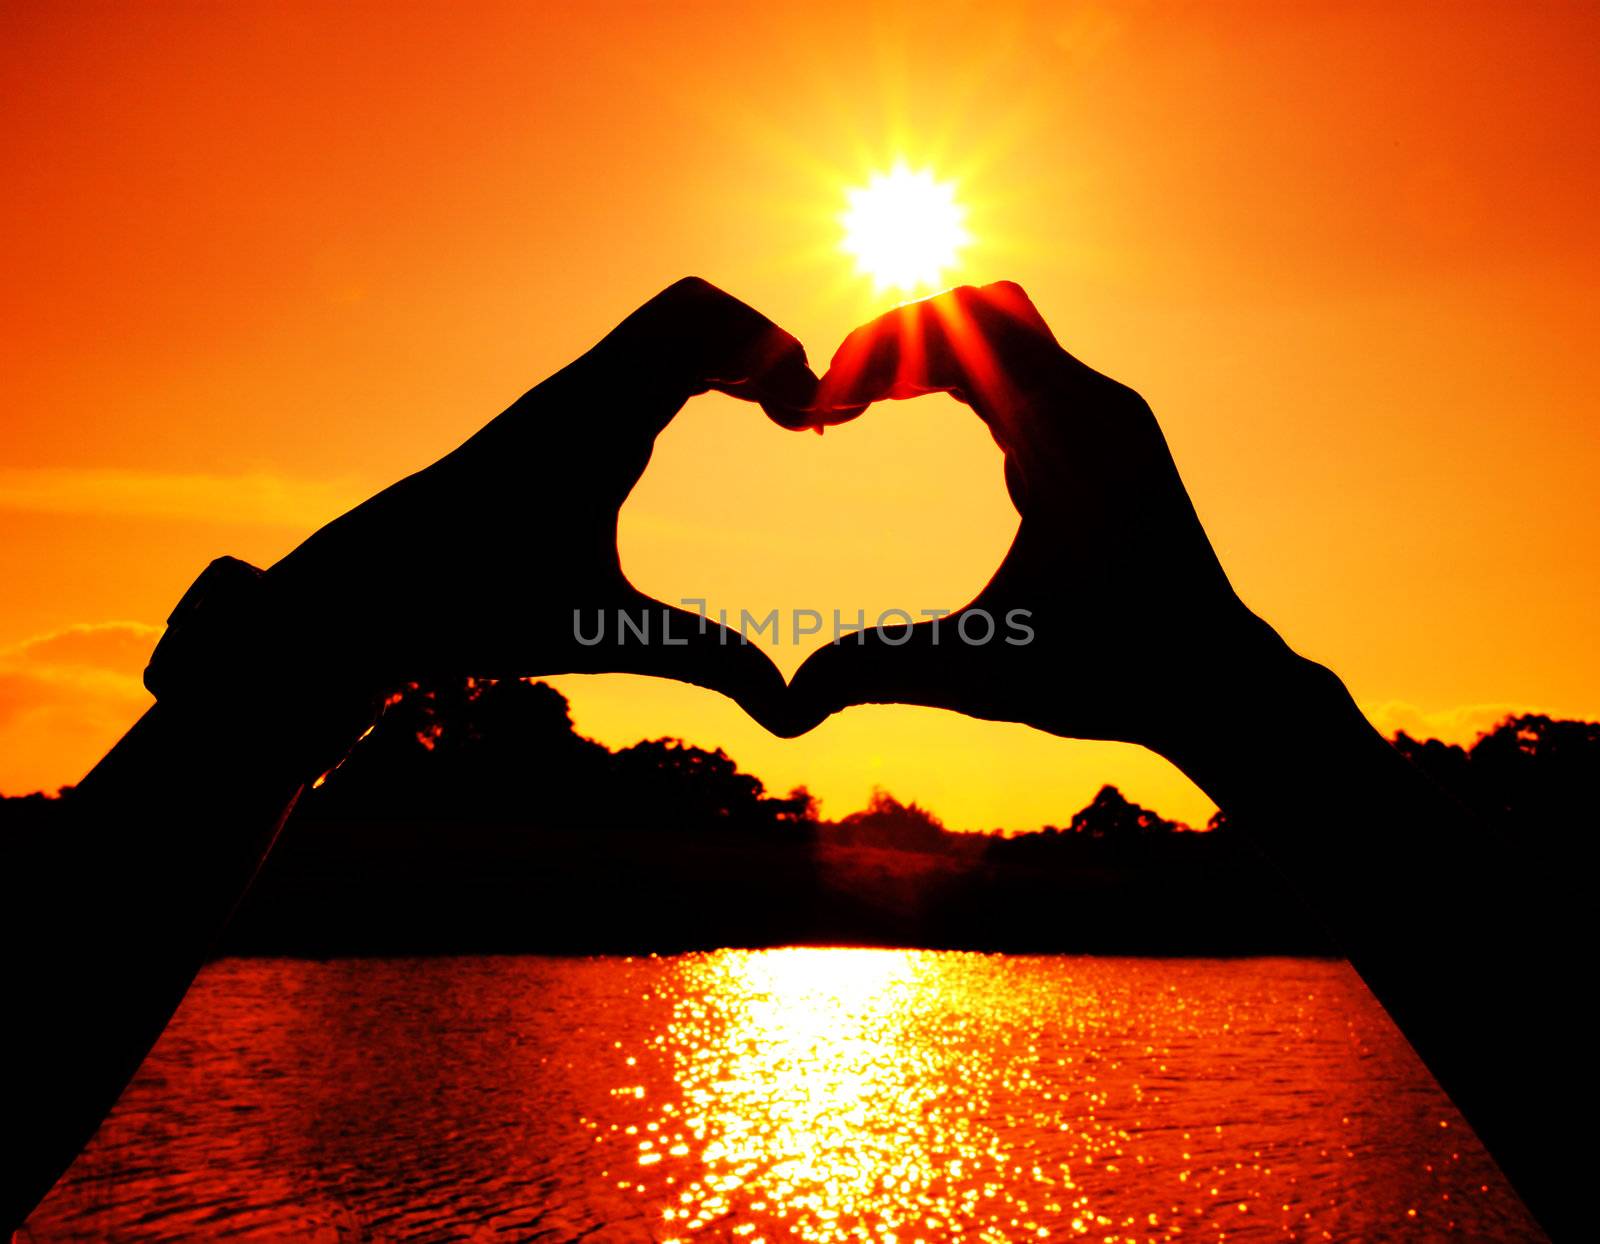 heart shape made with man and woman hands at the sun by geargodz